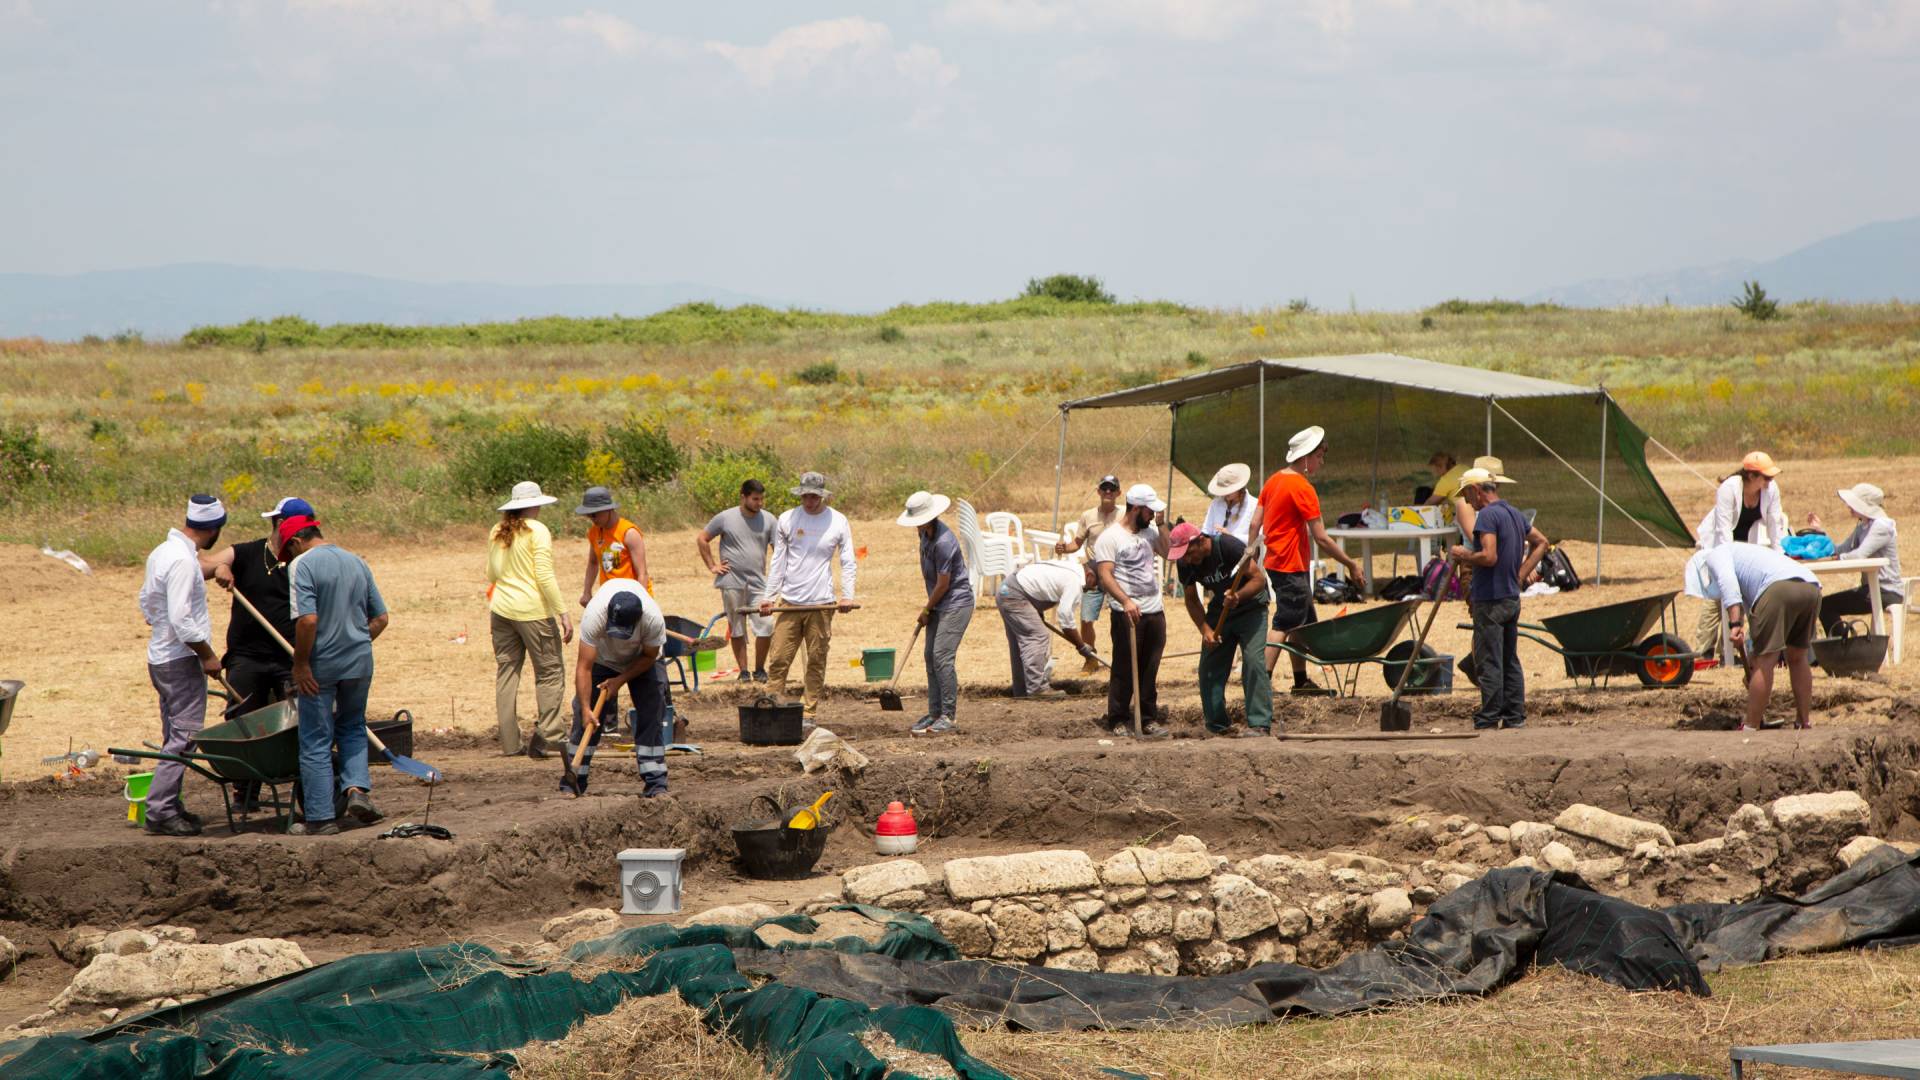 Students digging at excavation site